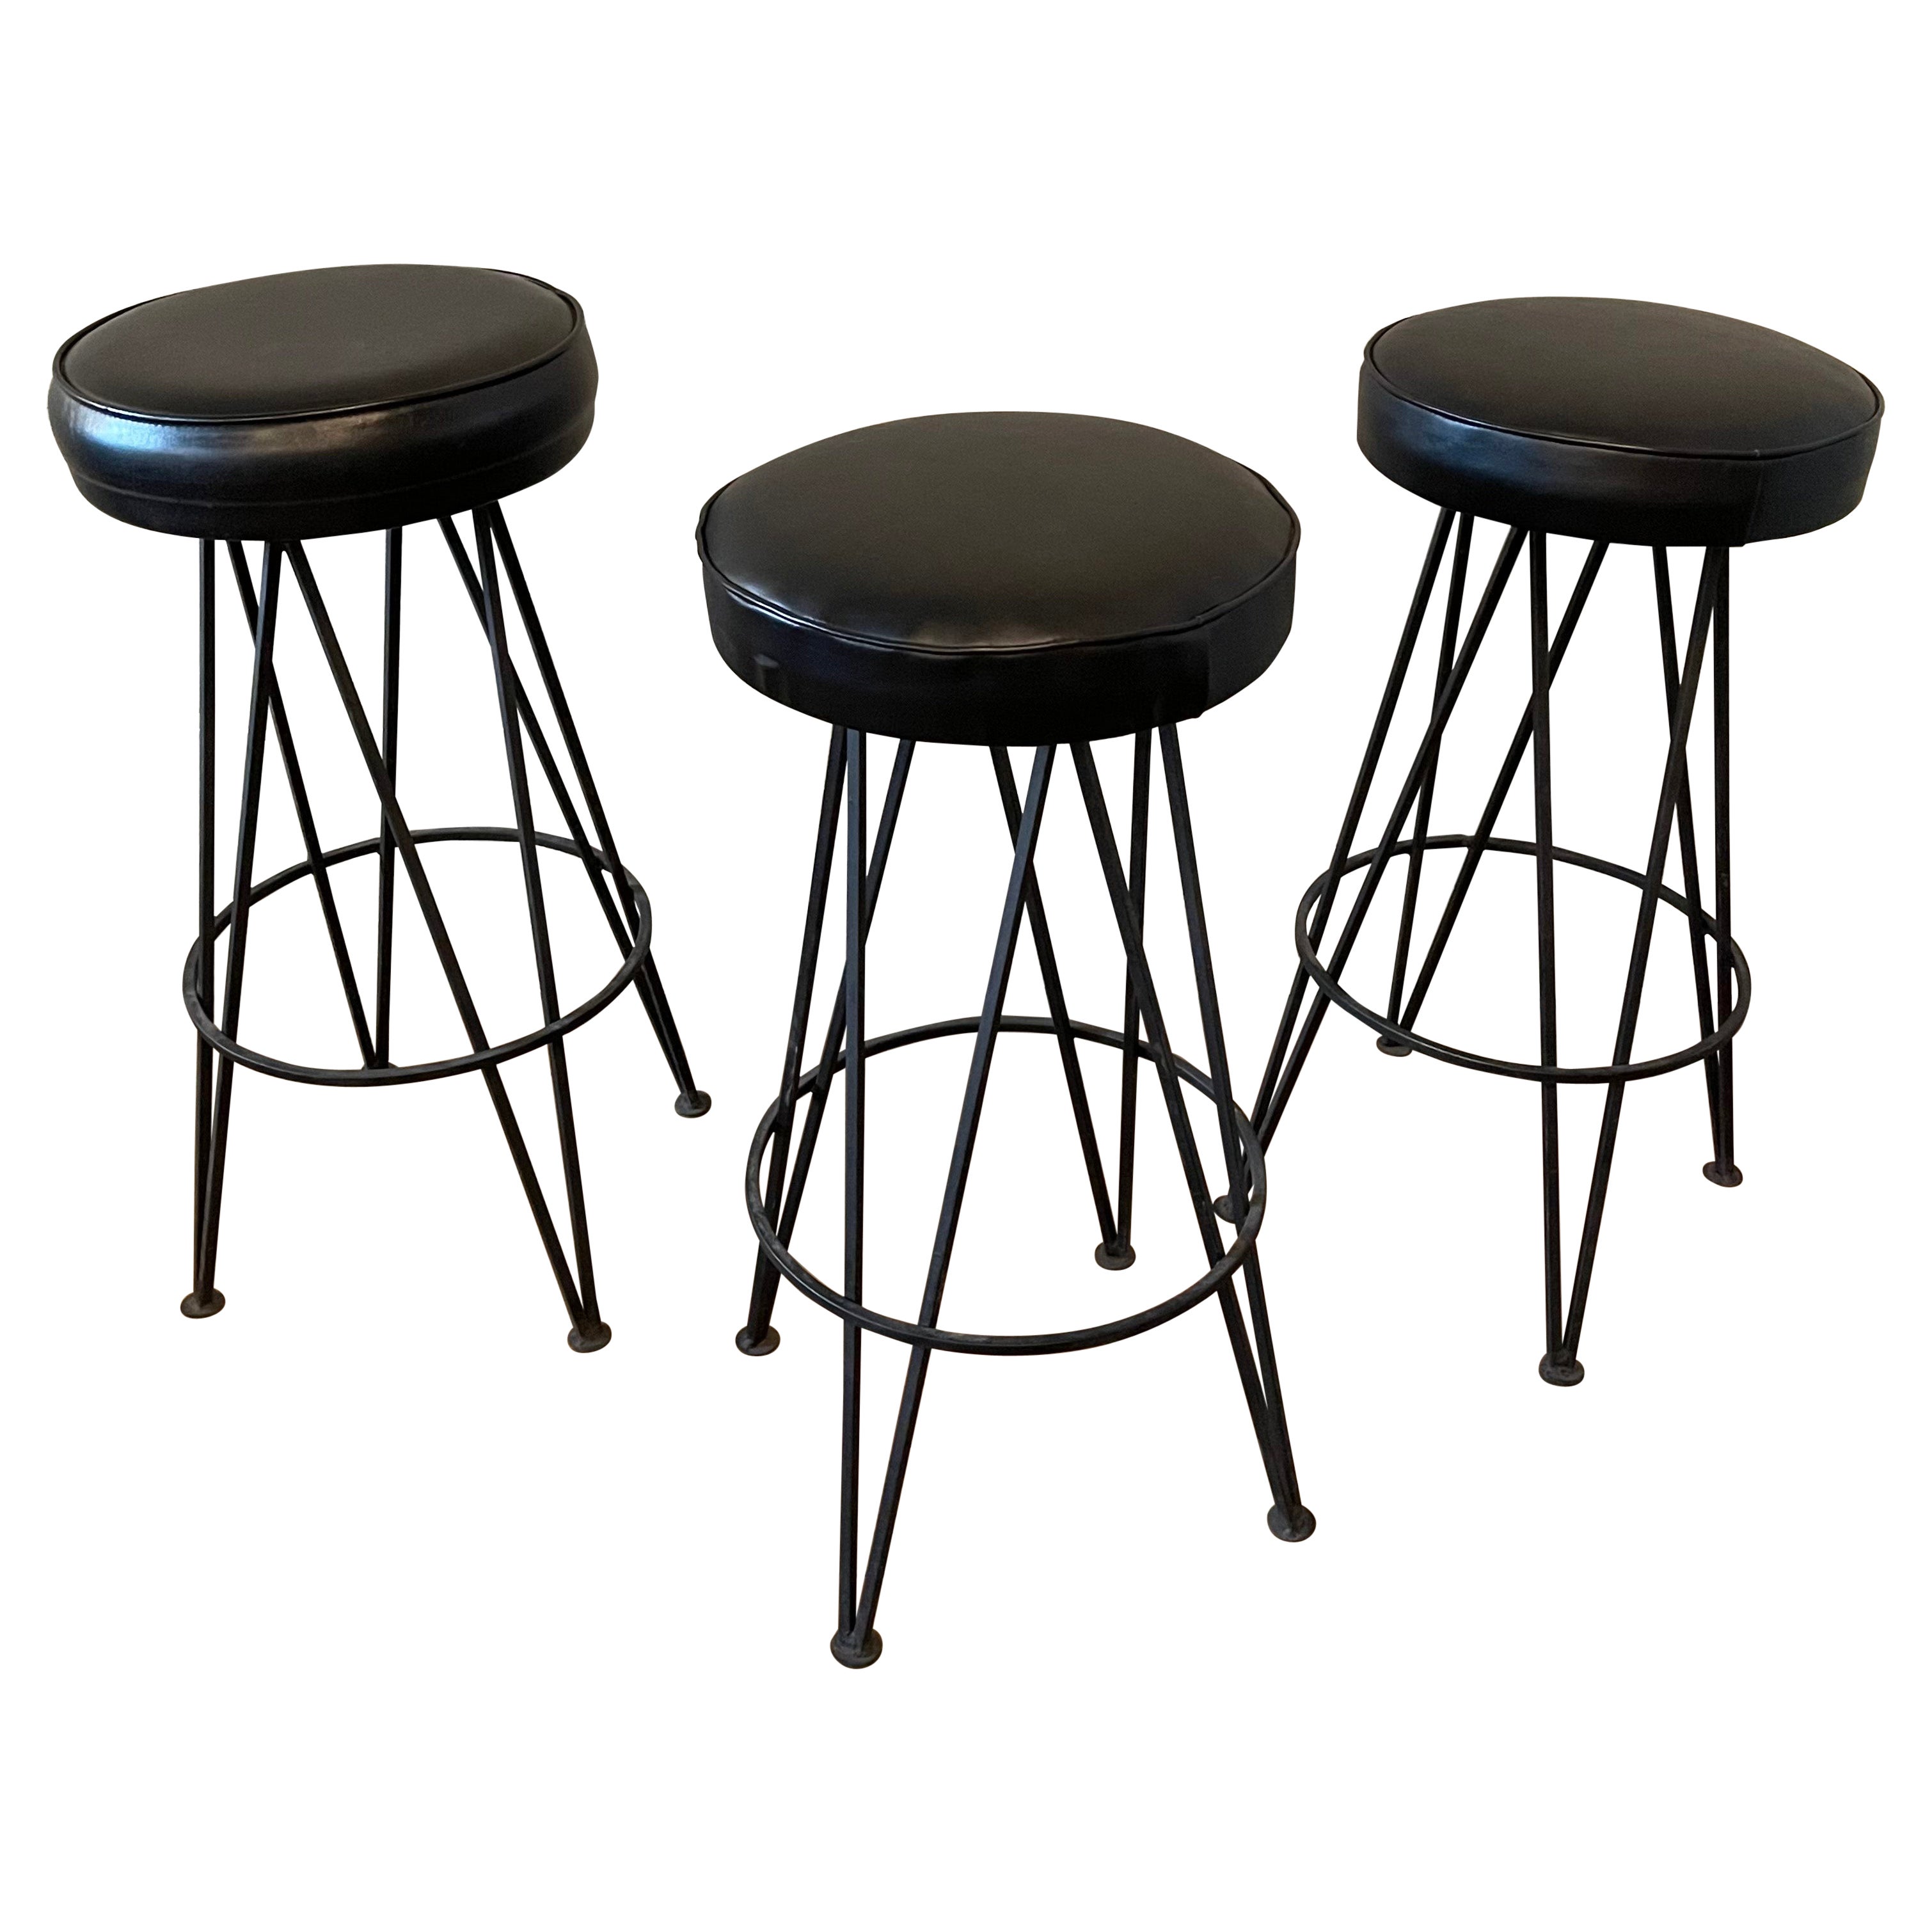 Mid-Century Modern Wrought Iron Hairpin Bar Stools For Sale